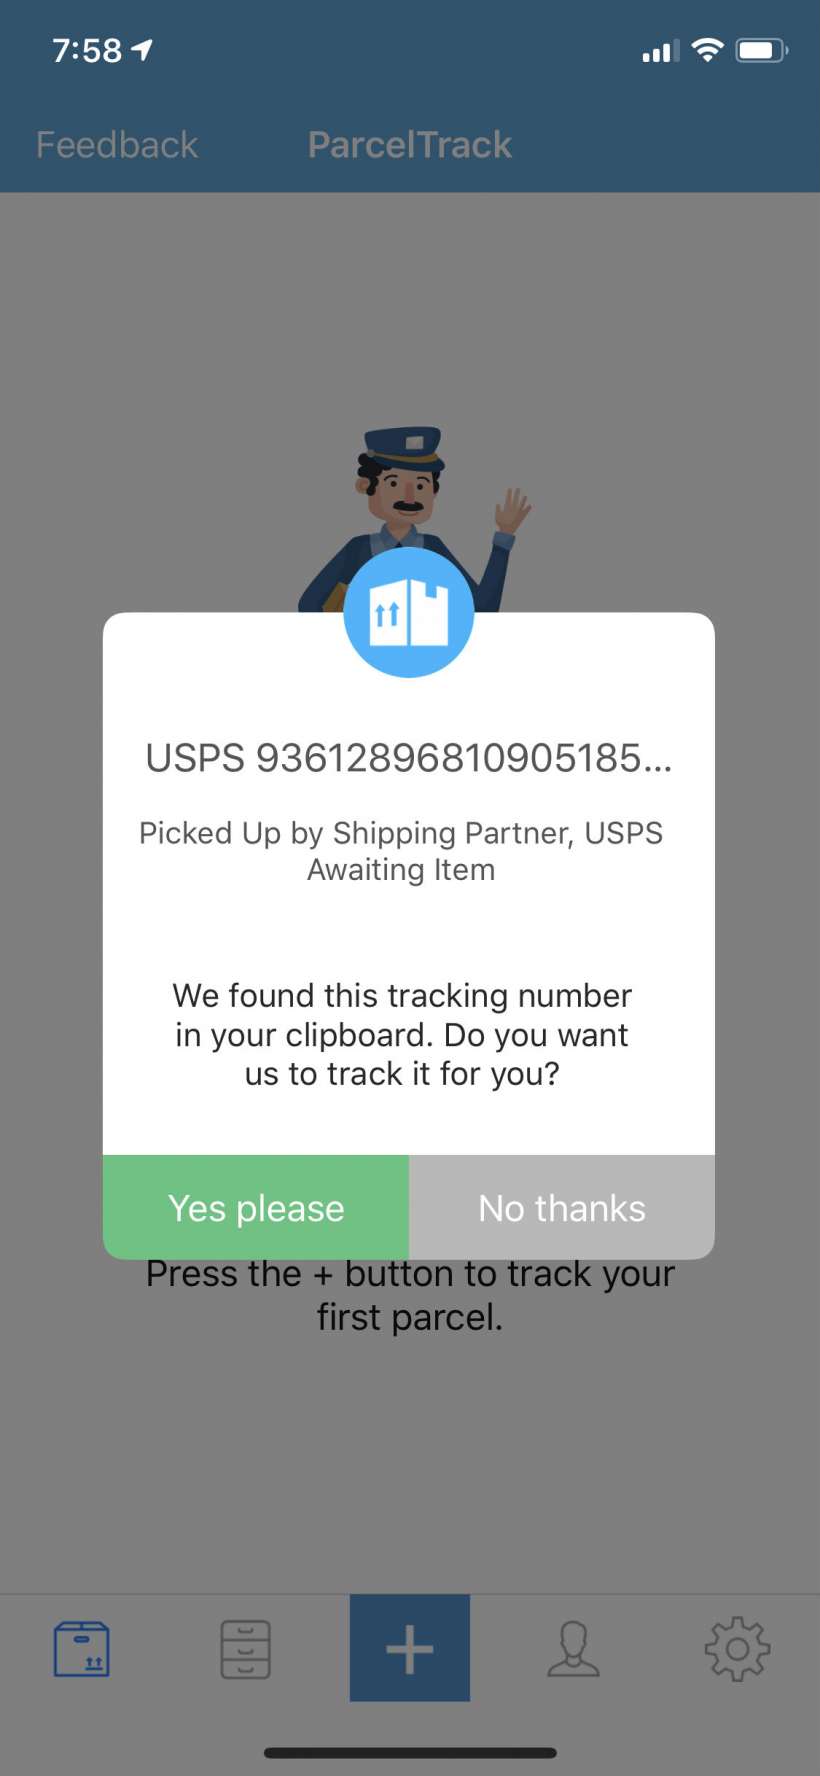 How to track your UPS, FedEx, USPS and other shipments with ParcelTrack for iPhone and iPad.